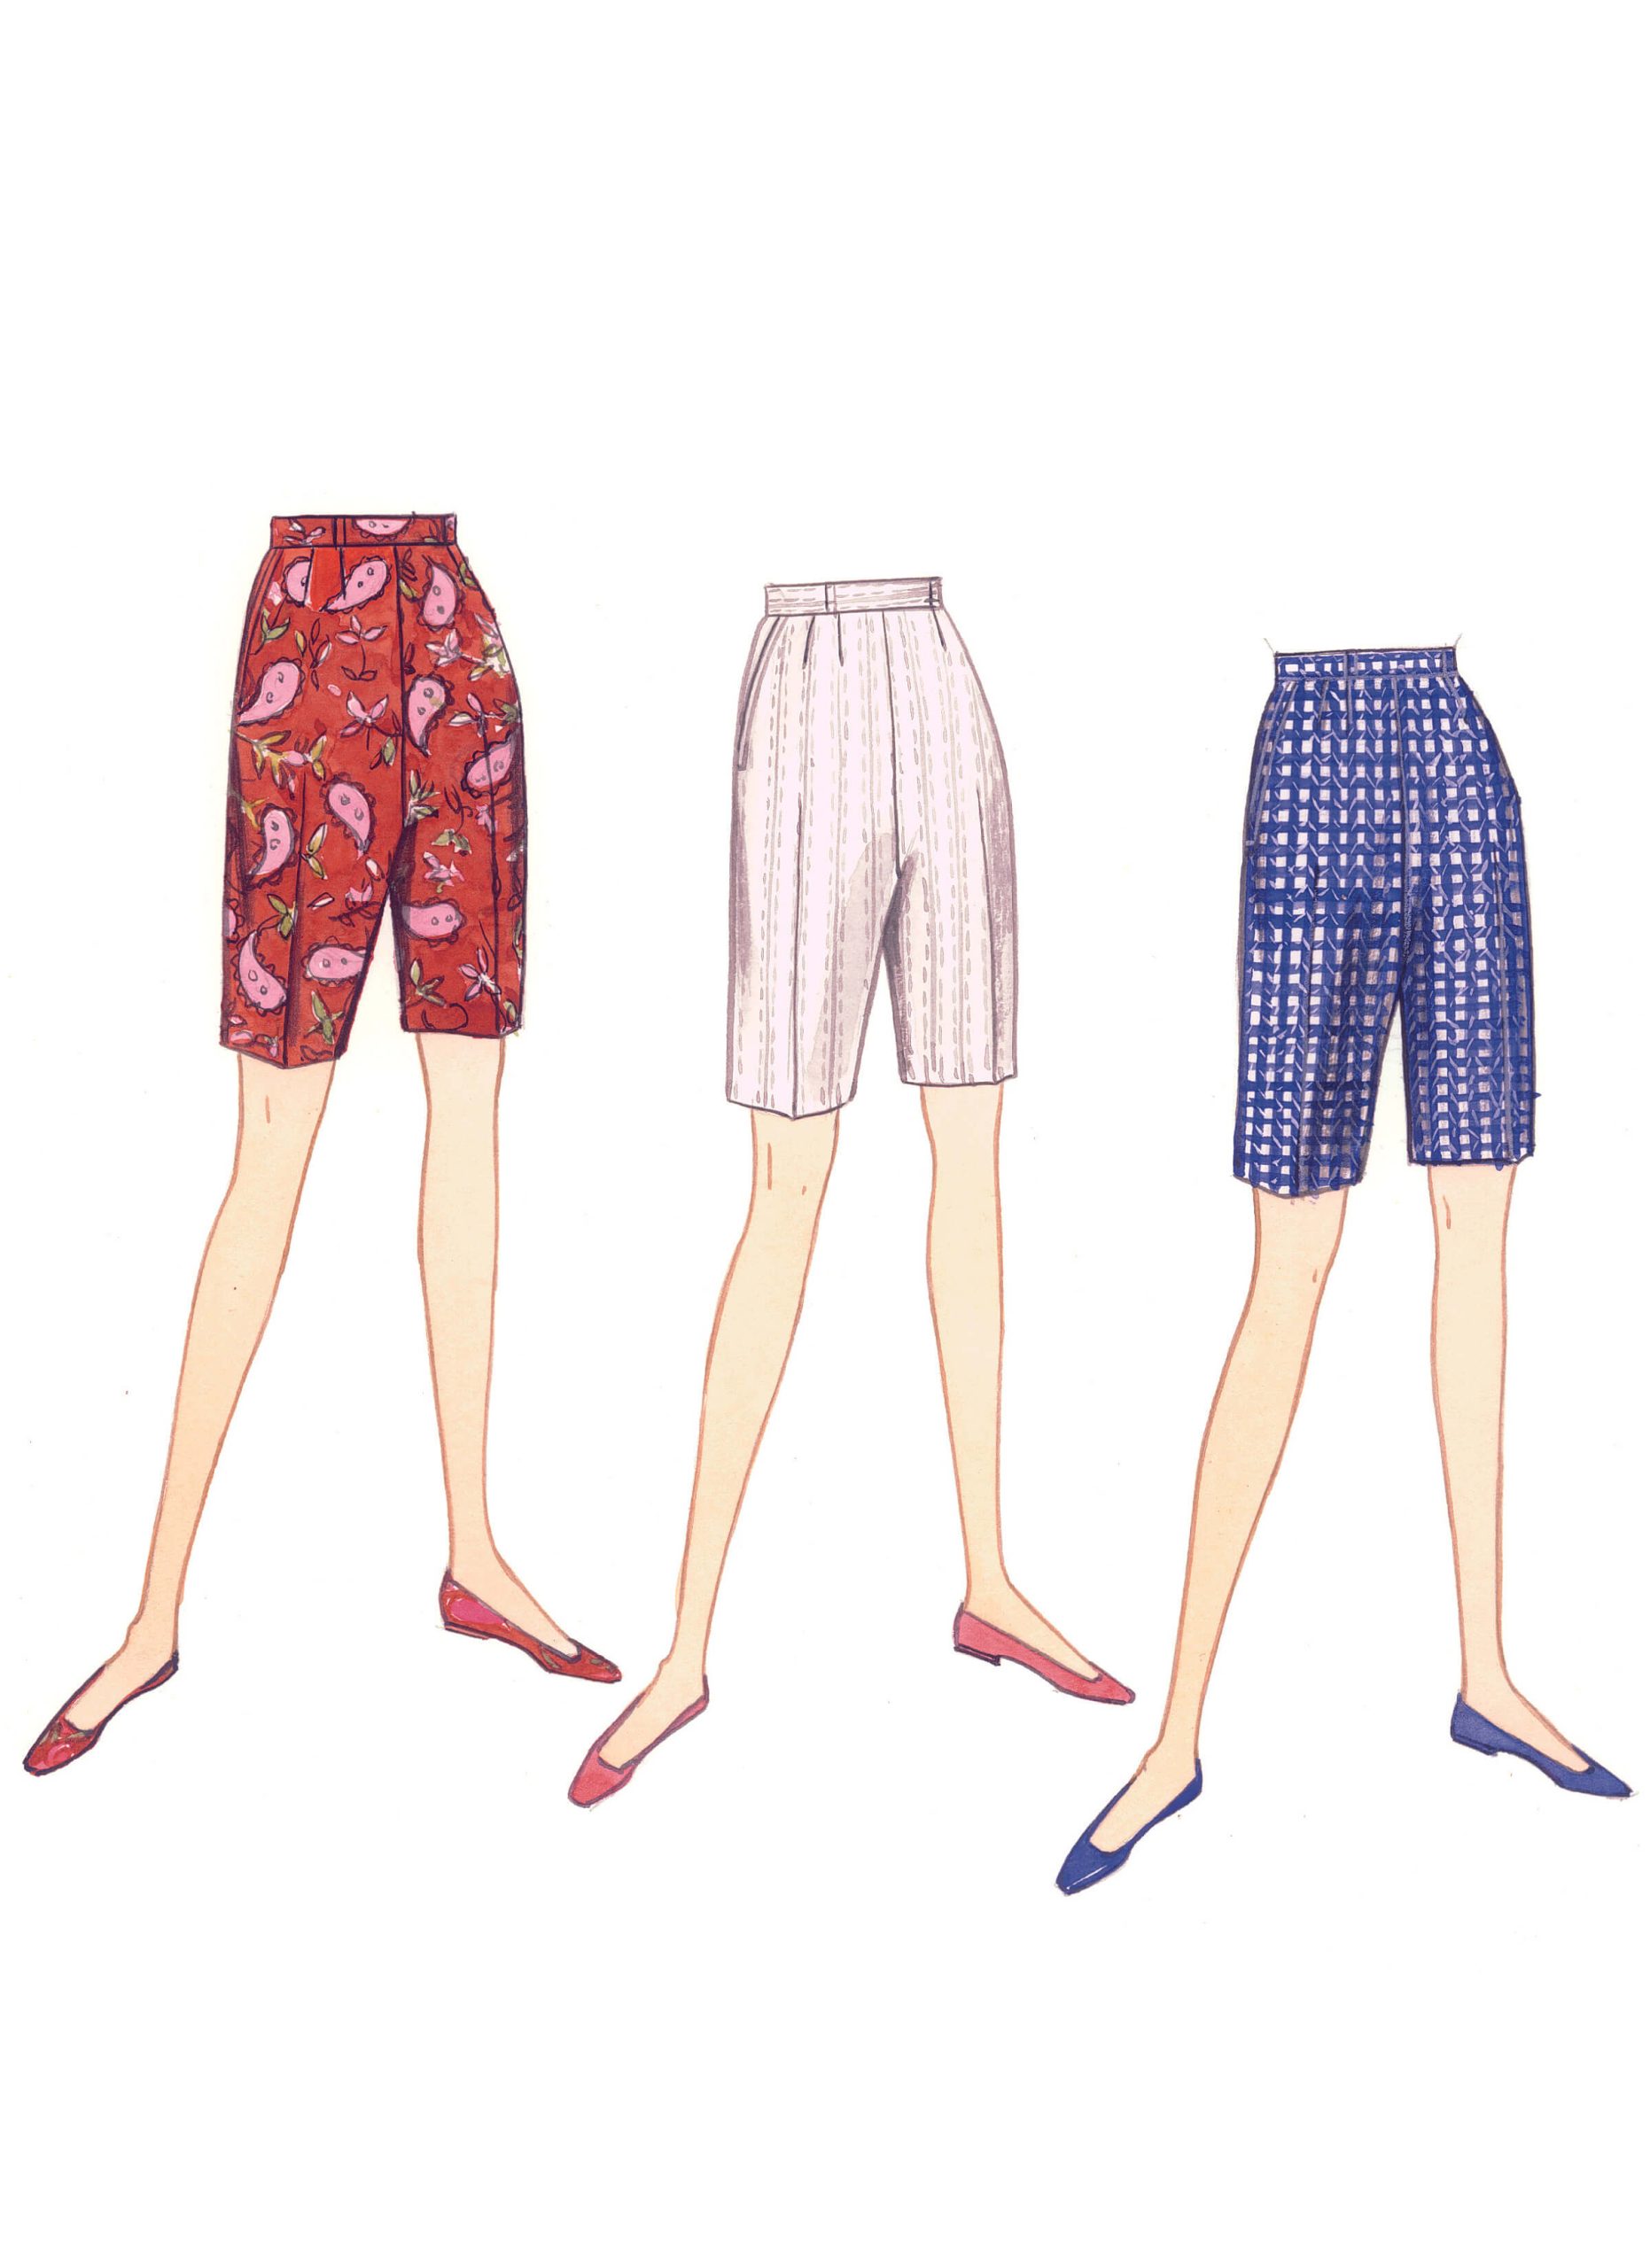 Vogue Patterns V9189 Misses' Shorts and Tapered Pants